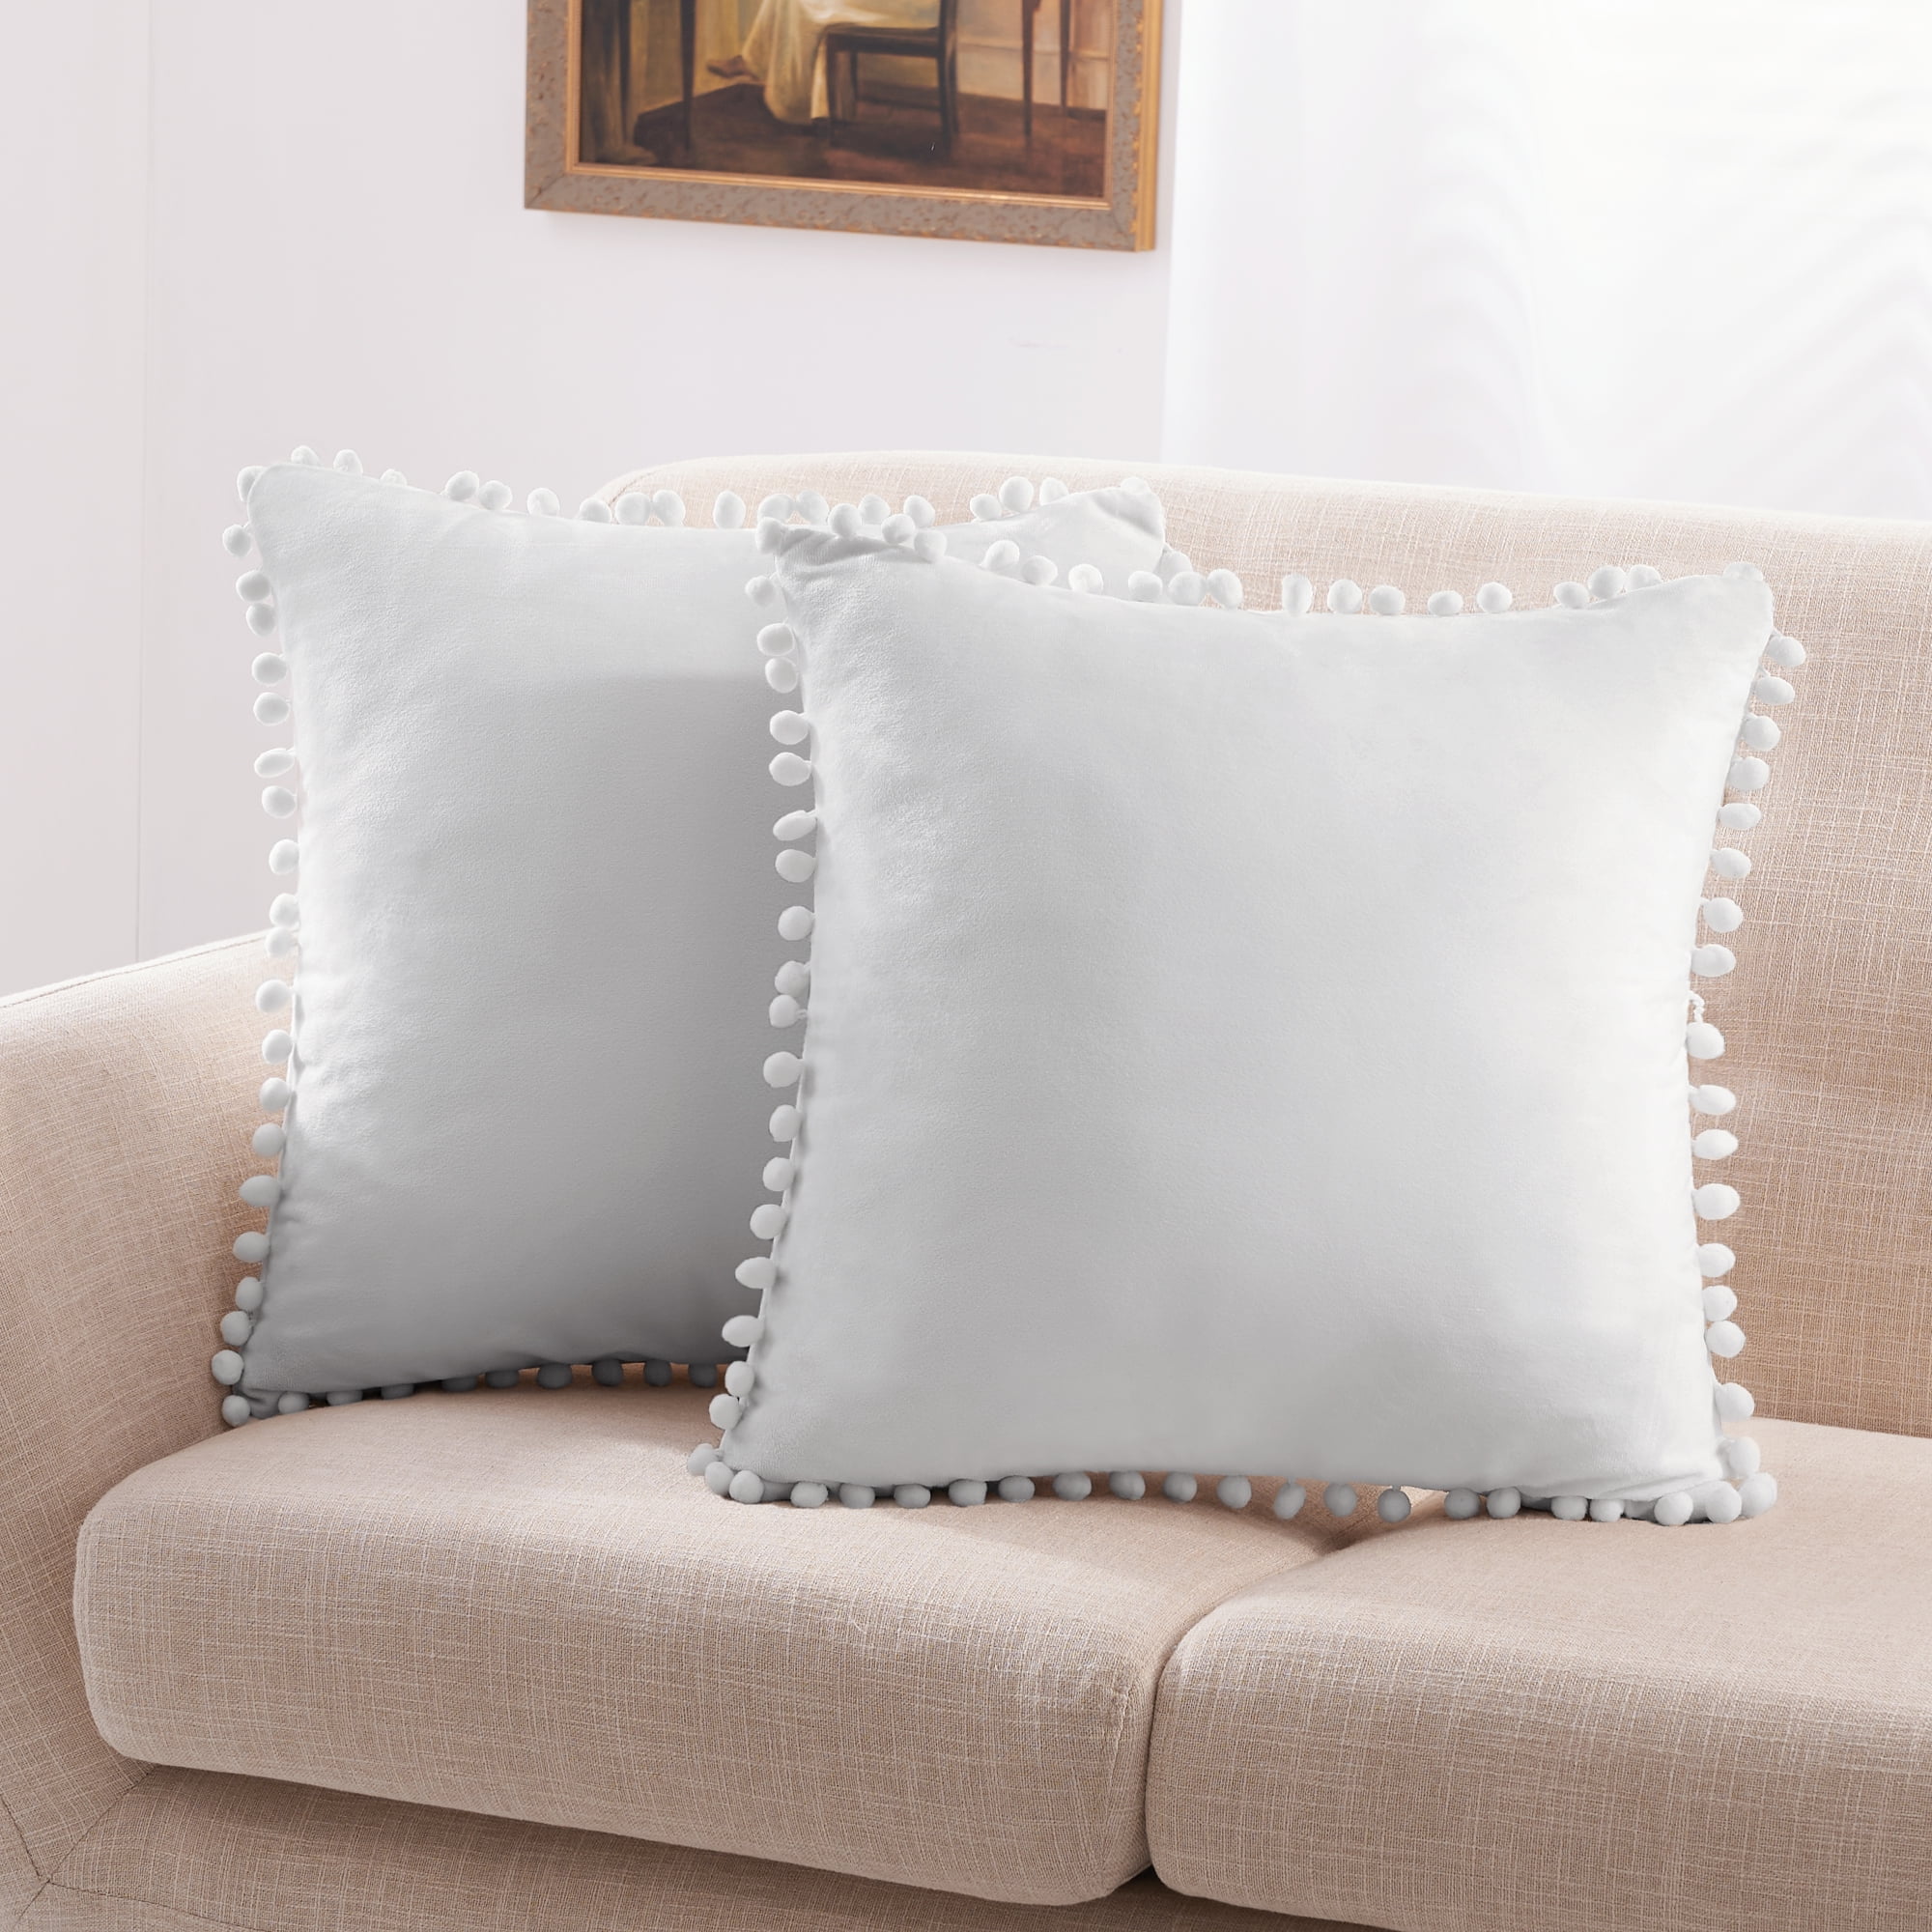  Deconovo 22x22 Pillow Insert, 2 Pack White Couch